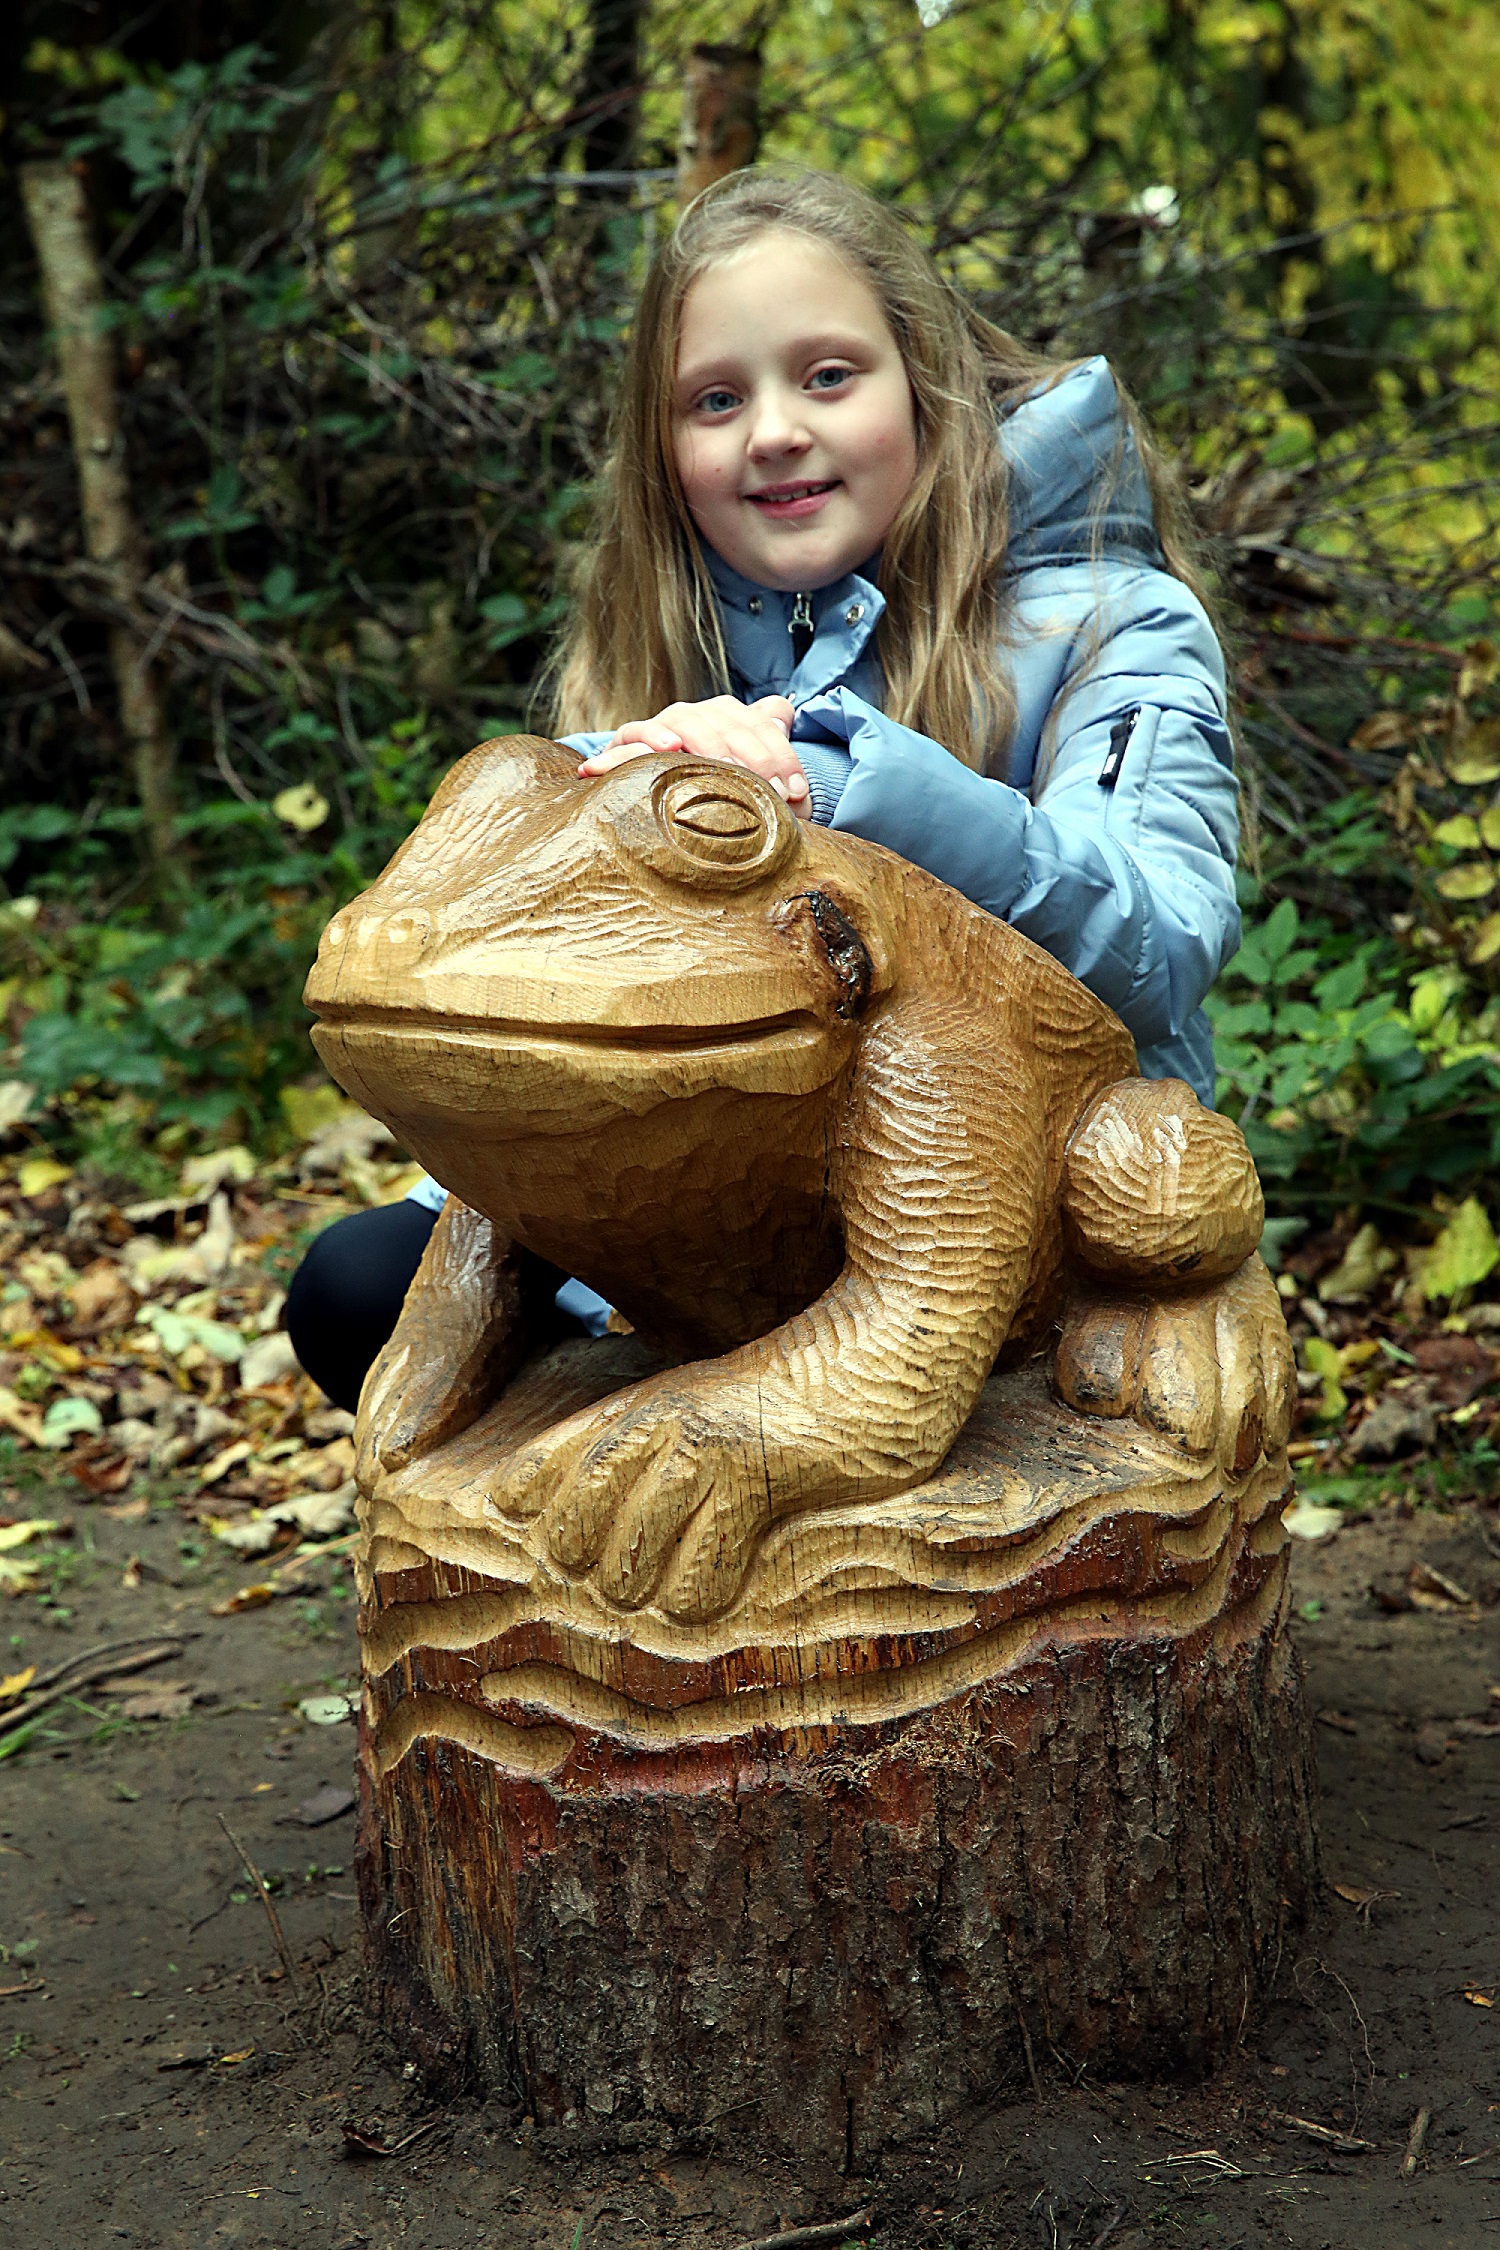 New Carved Sculptures Making Up New Trail At Hardwick Park Prove To Be Popular